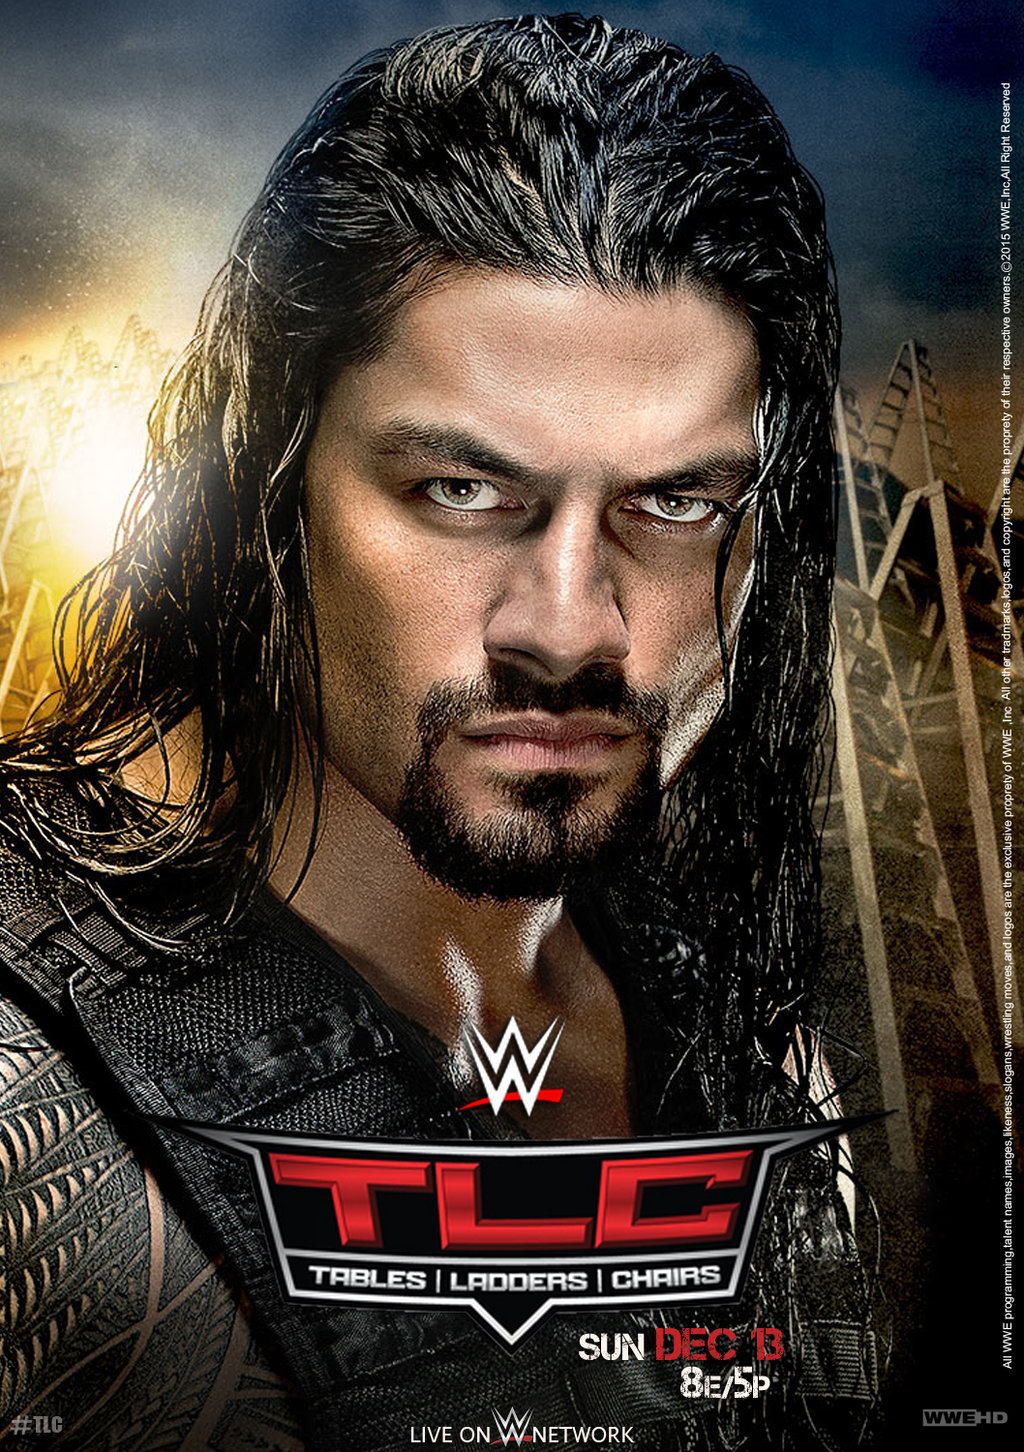 WWE TLC Tables, Ladders & Chairs 2015